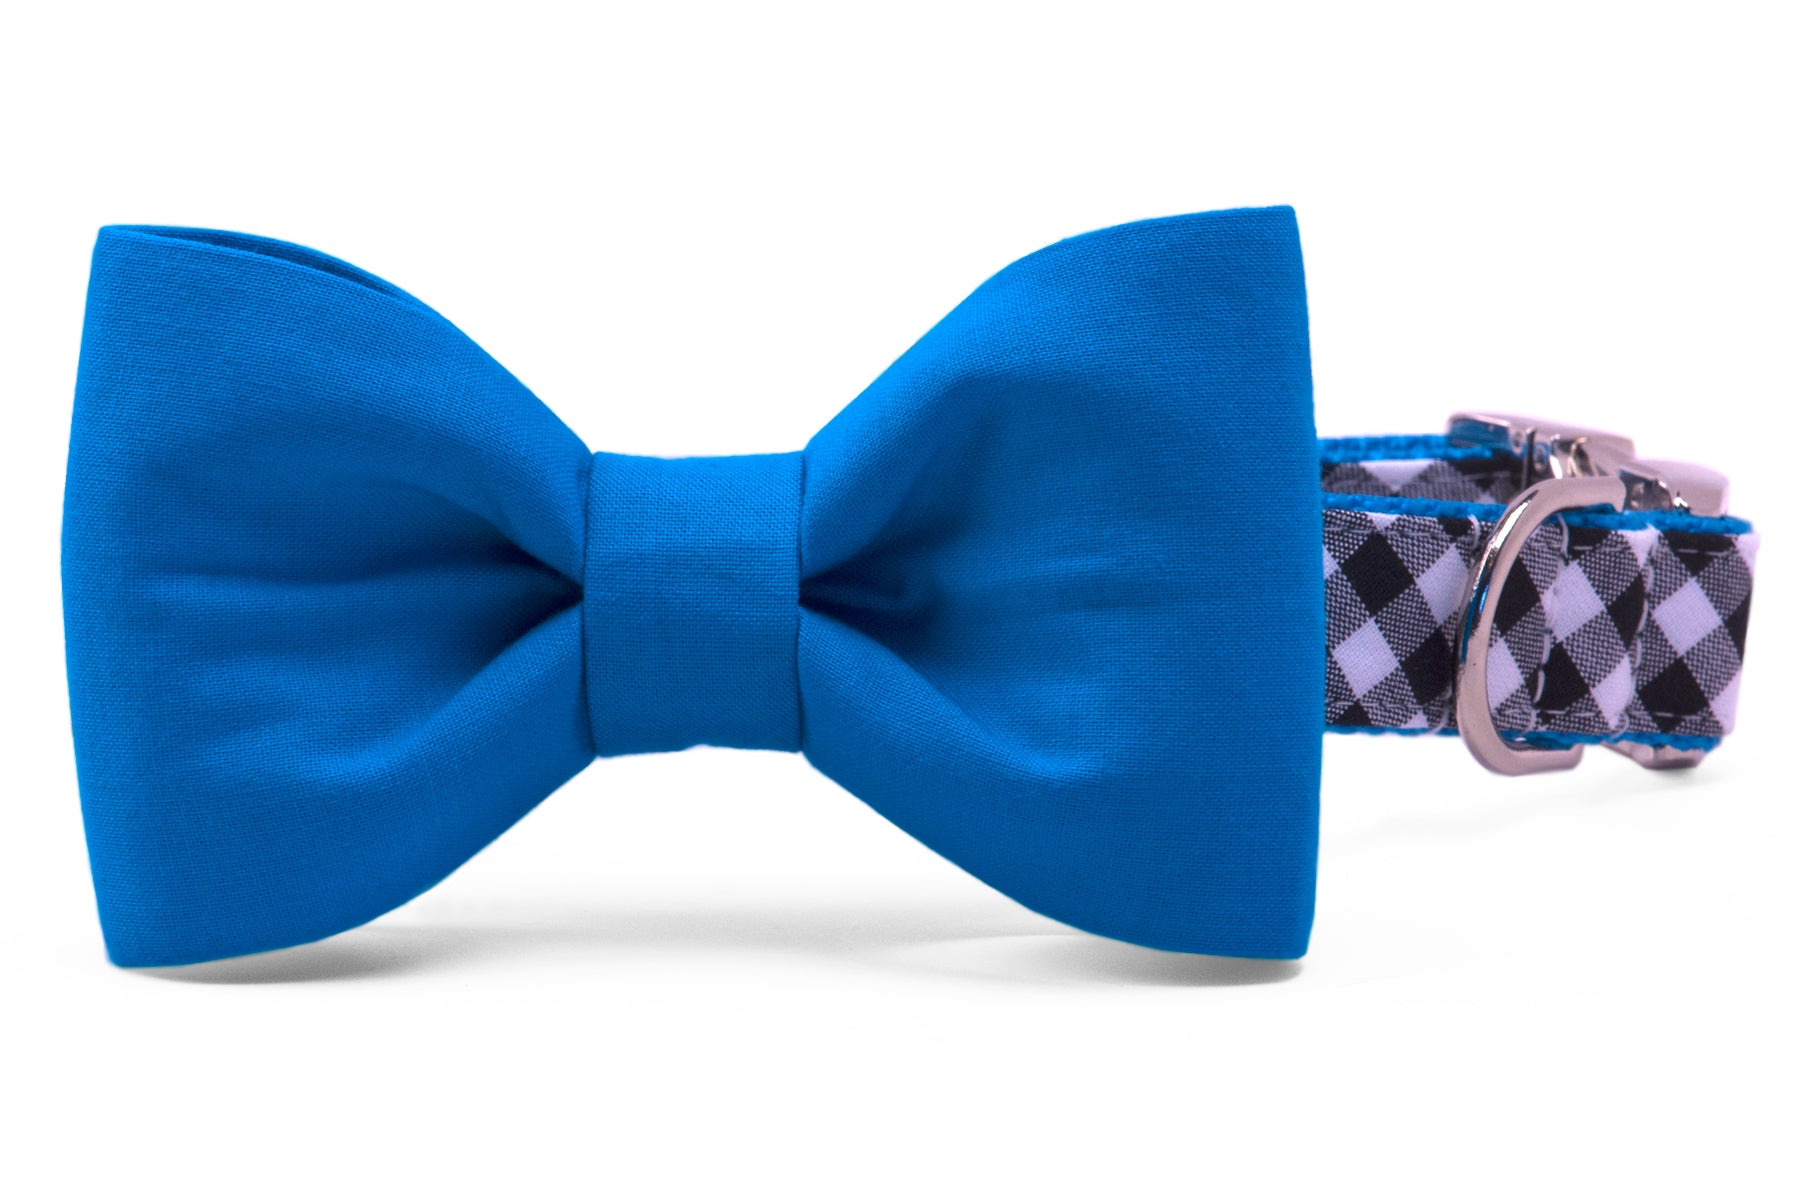 Build Your Own Game Day Bow Tie Dog Collar - Crew LaLa